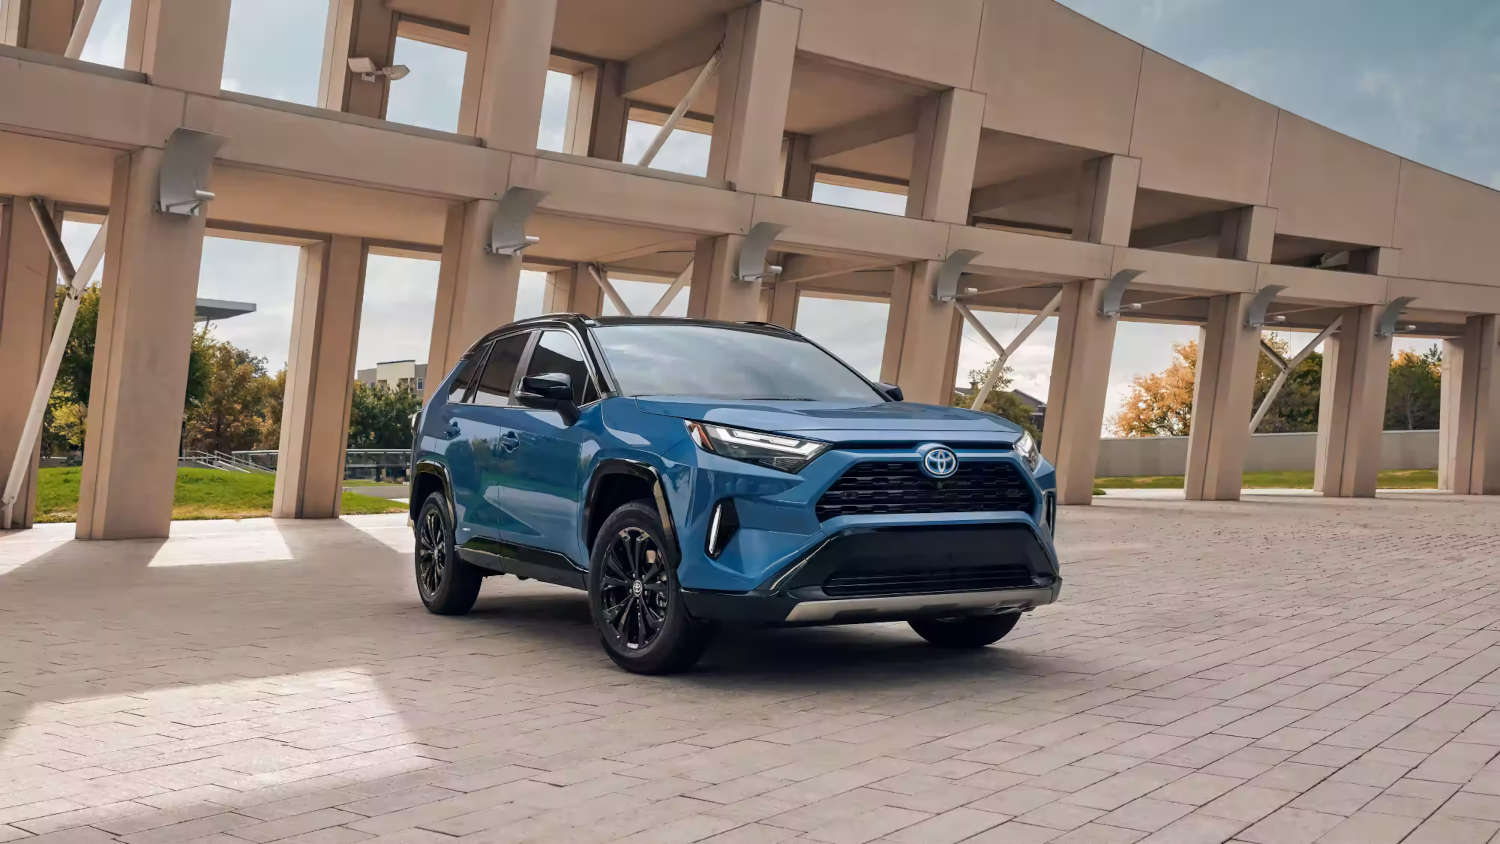 The front of the 2023 Toyota RAV4 is perfectly safe